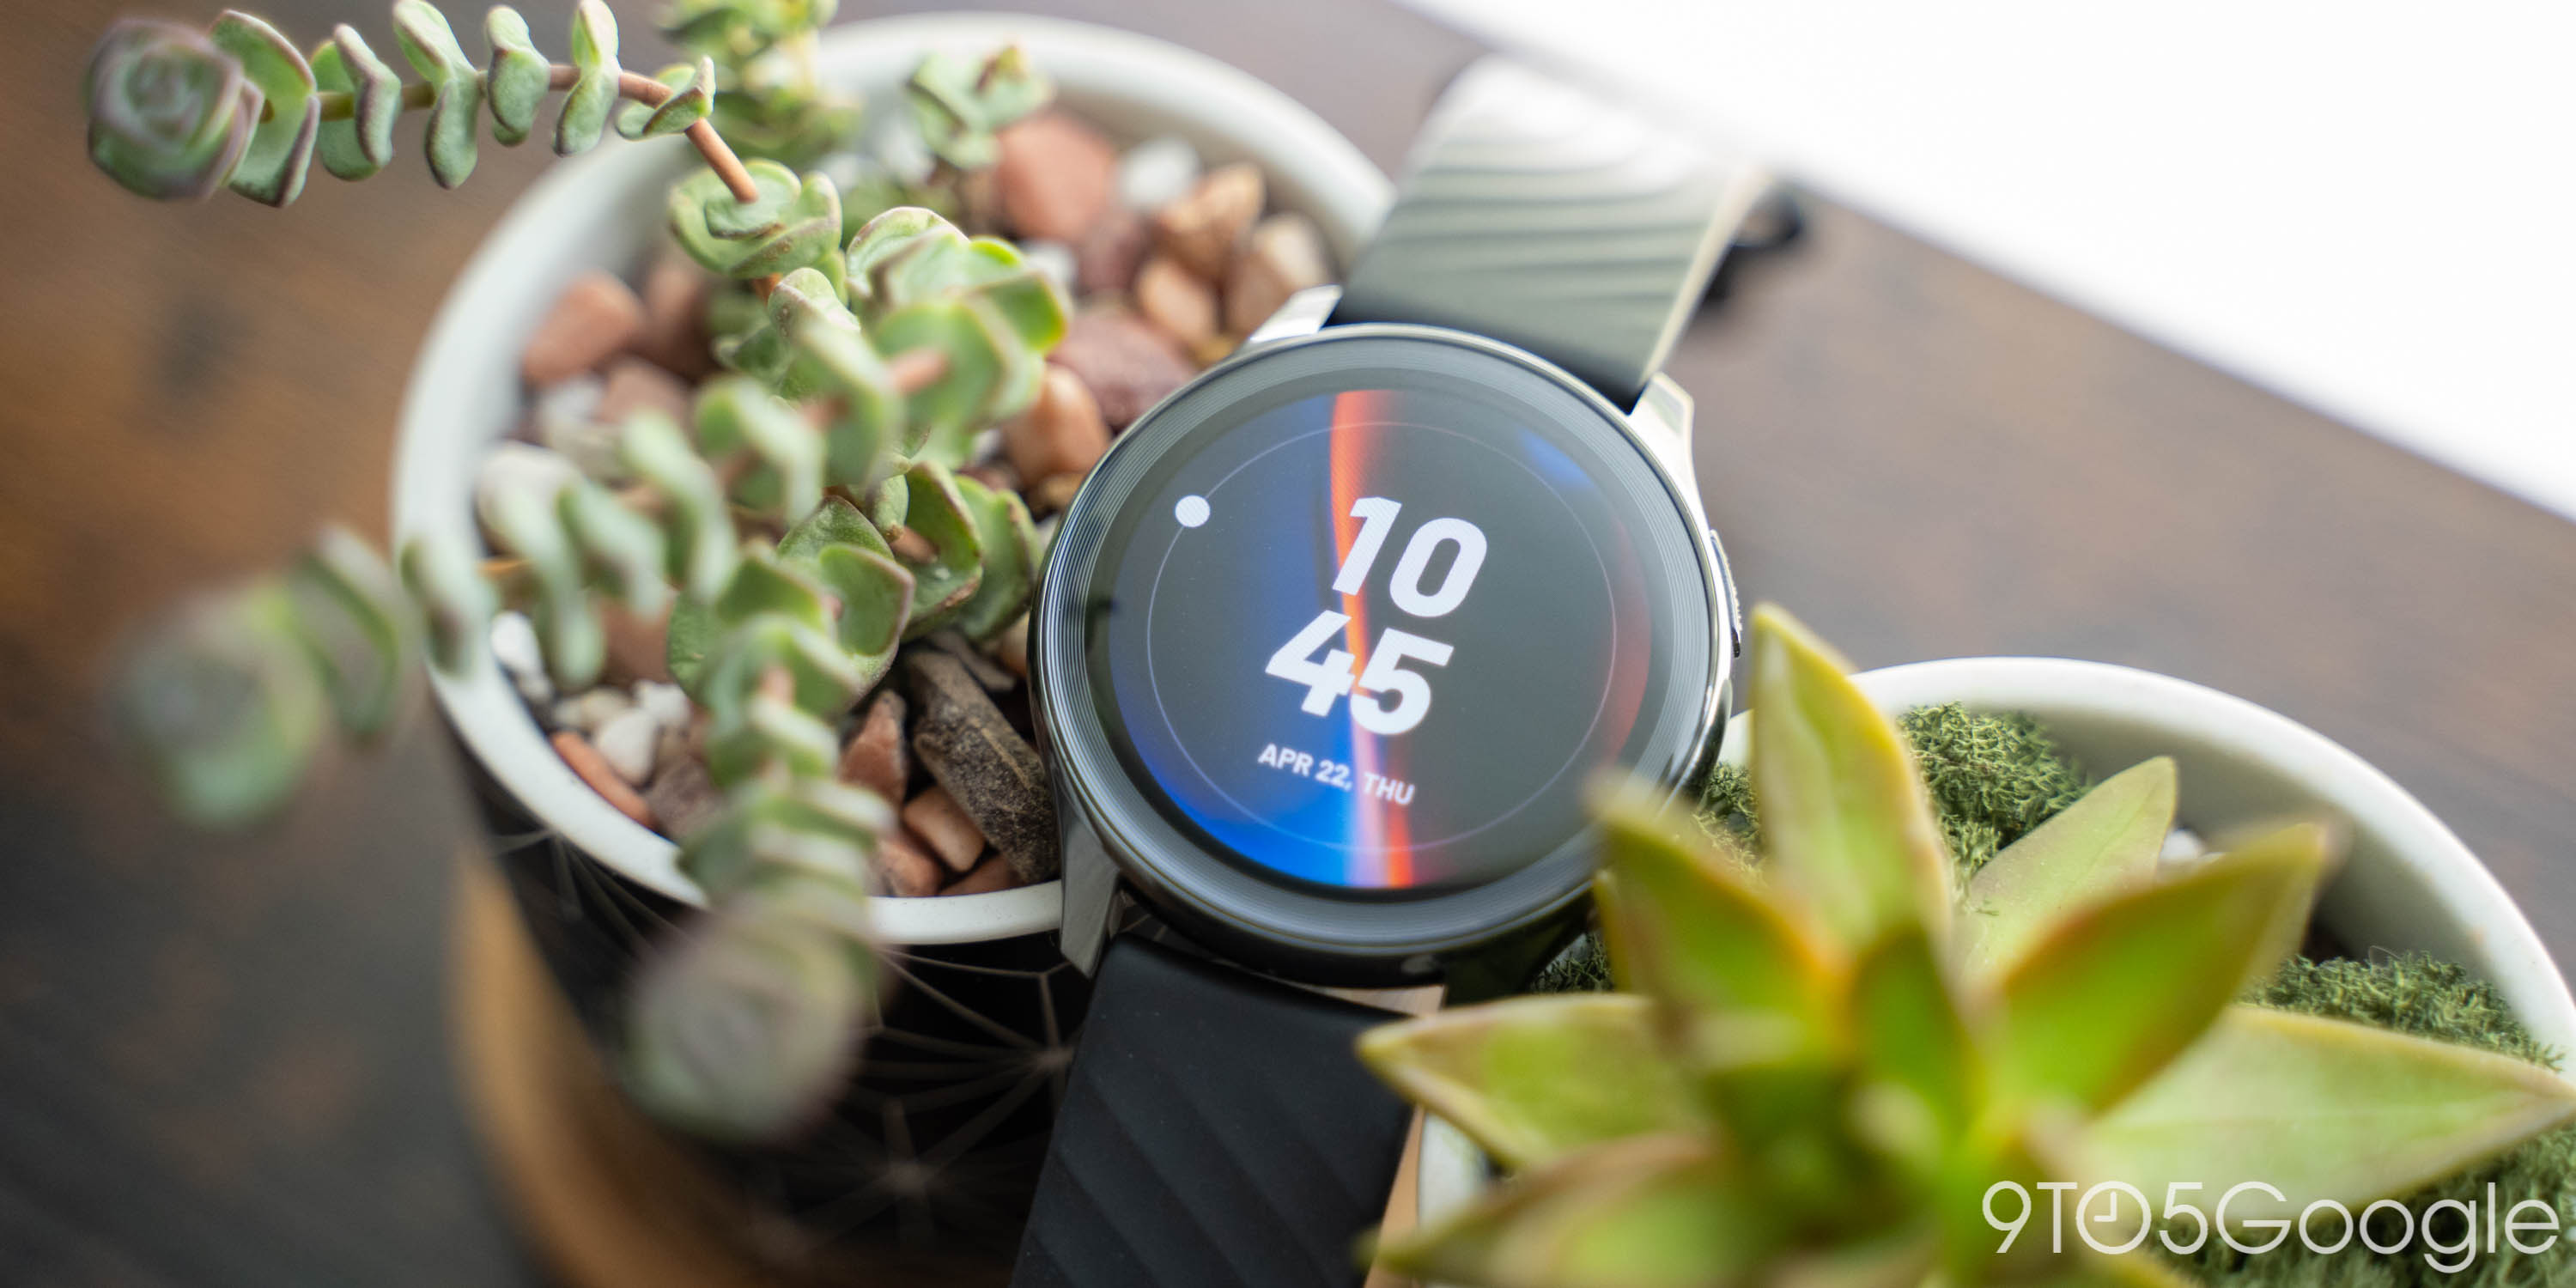 lustre Efterforskning kokain OnePlus Watch demands you settle for unfinished work - 9to5Google